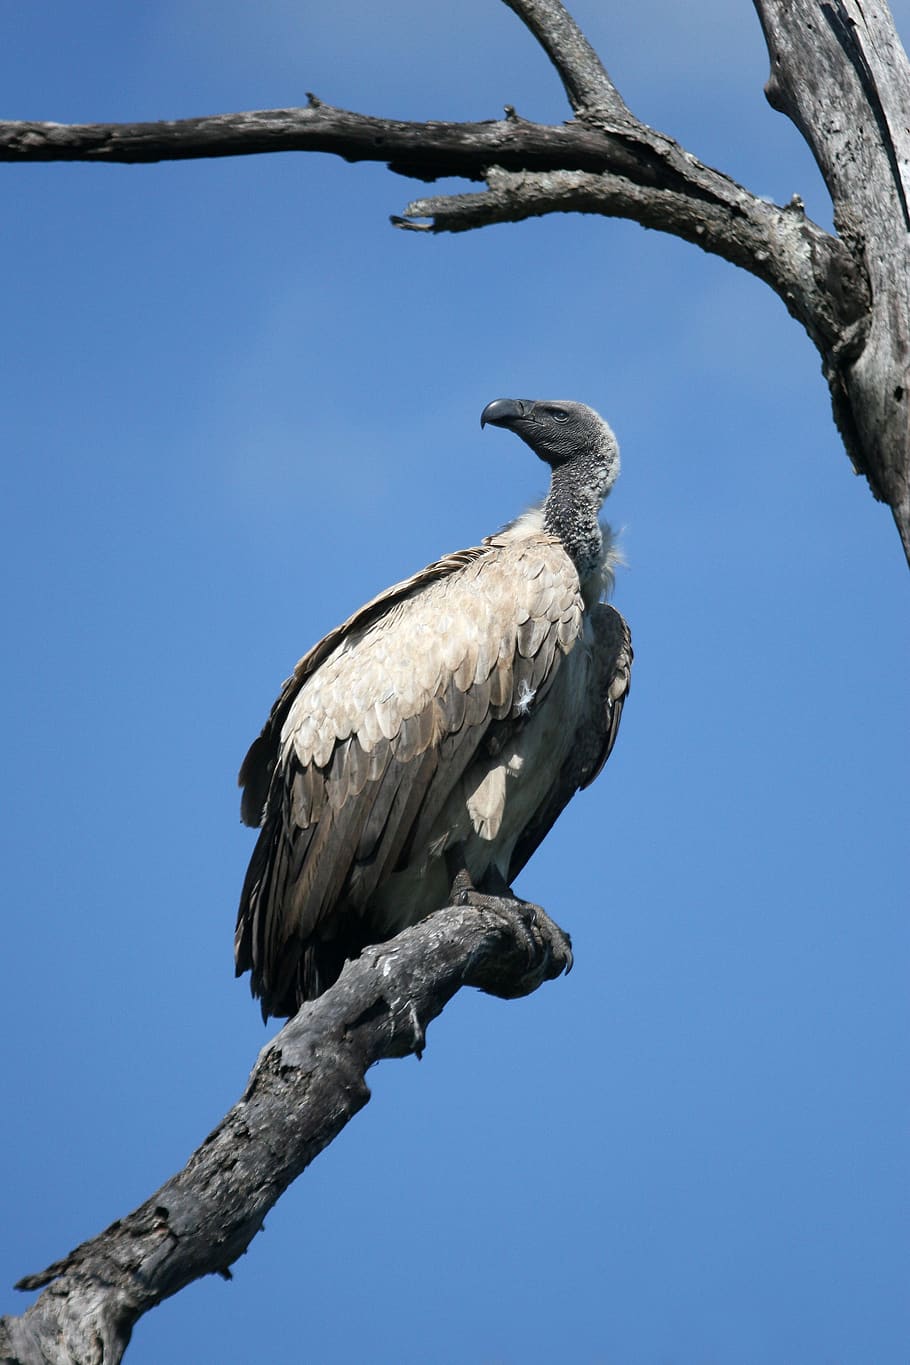 Black and Gray Vulture on Gray Wither Tree during Daytime, animal